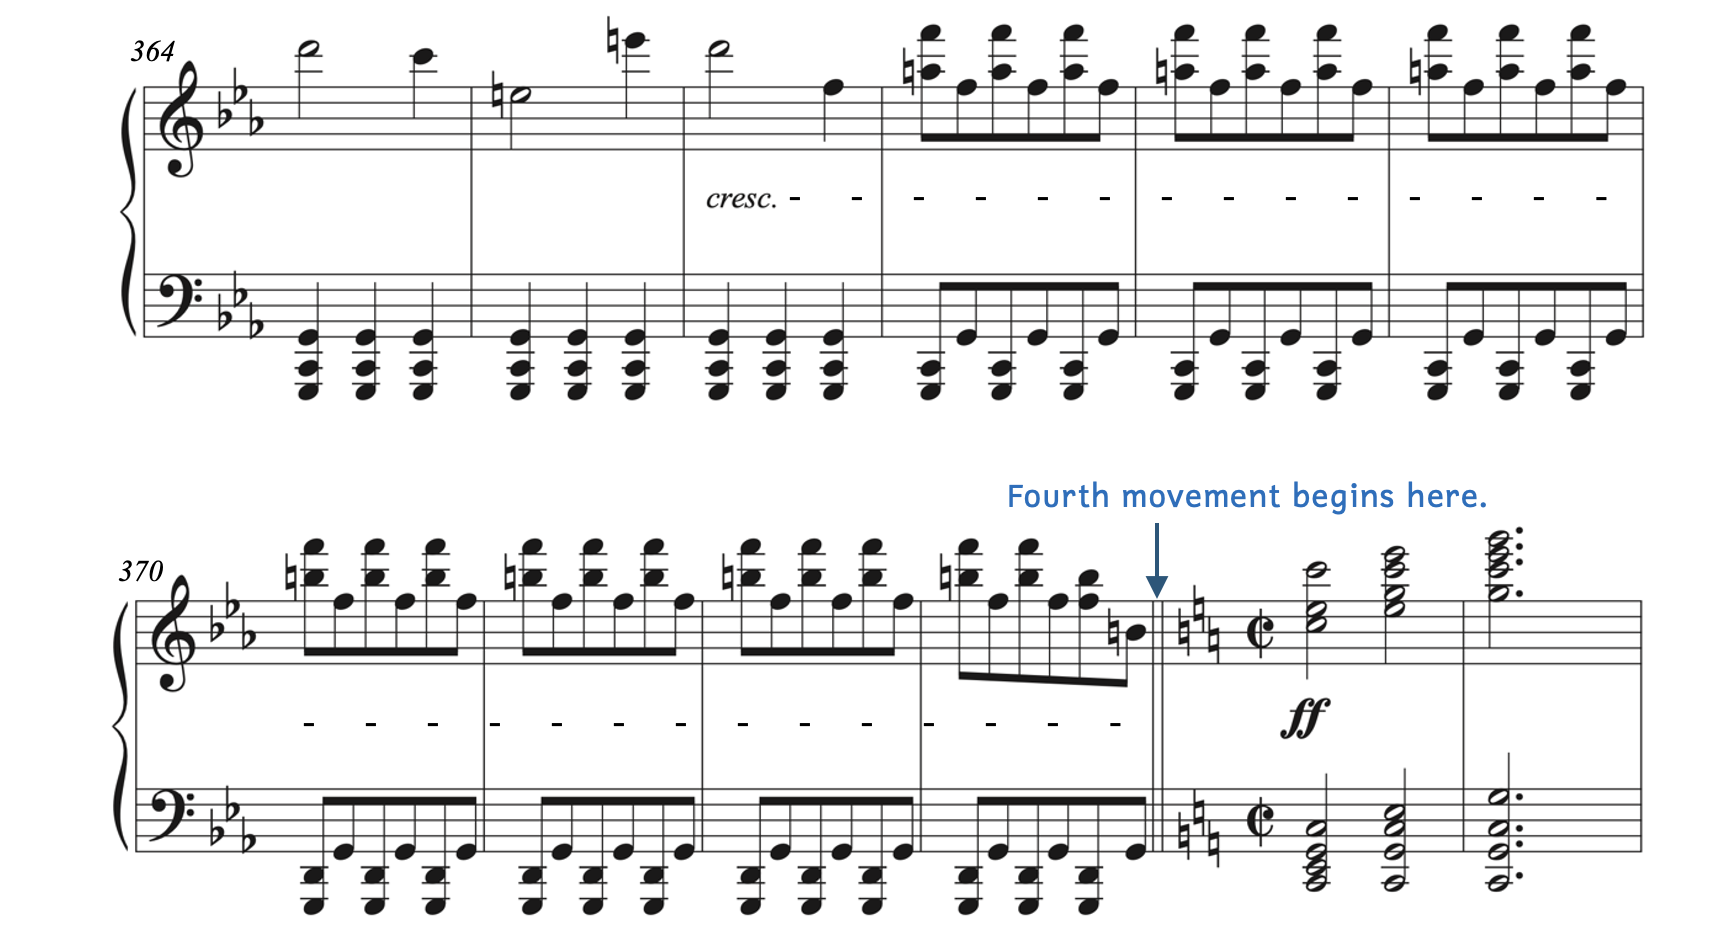 Example from Beethoven, Symphony No. 5 in C Minor, Op. 67, third to fourth movements. There is a long crescendo from measure 366 until 374. Measure 374 is where the fourth movement begins. The fourth movement begins fortissimo.